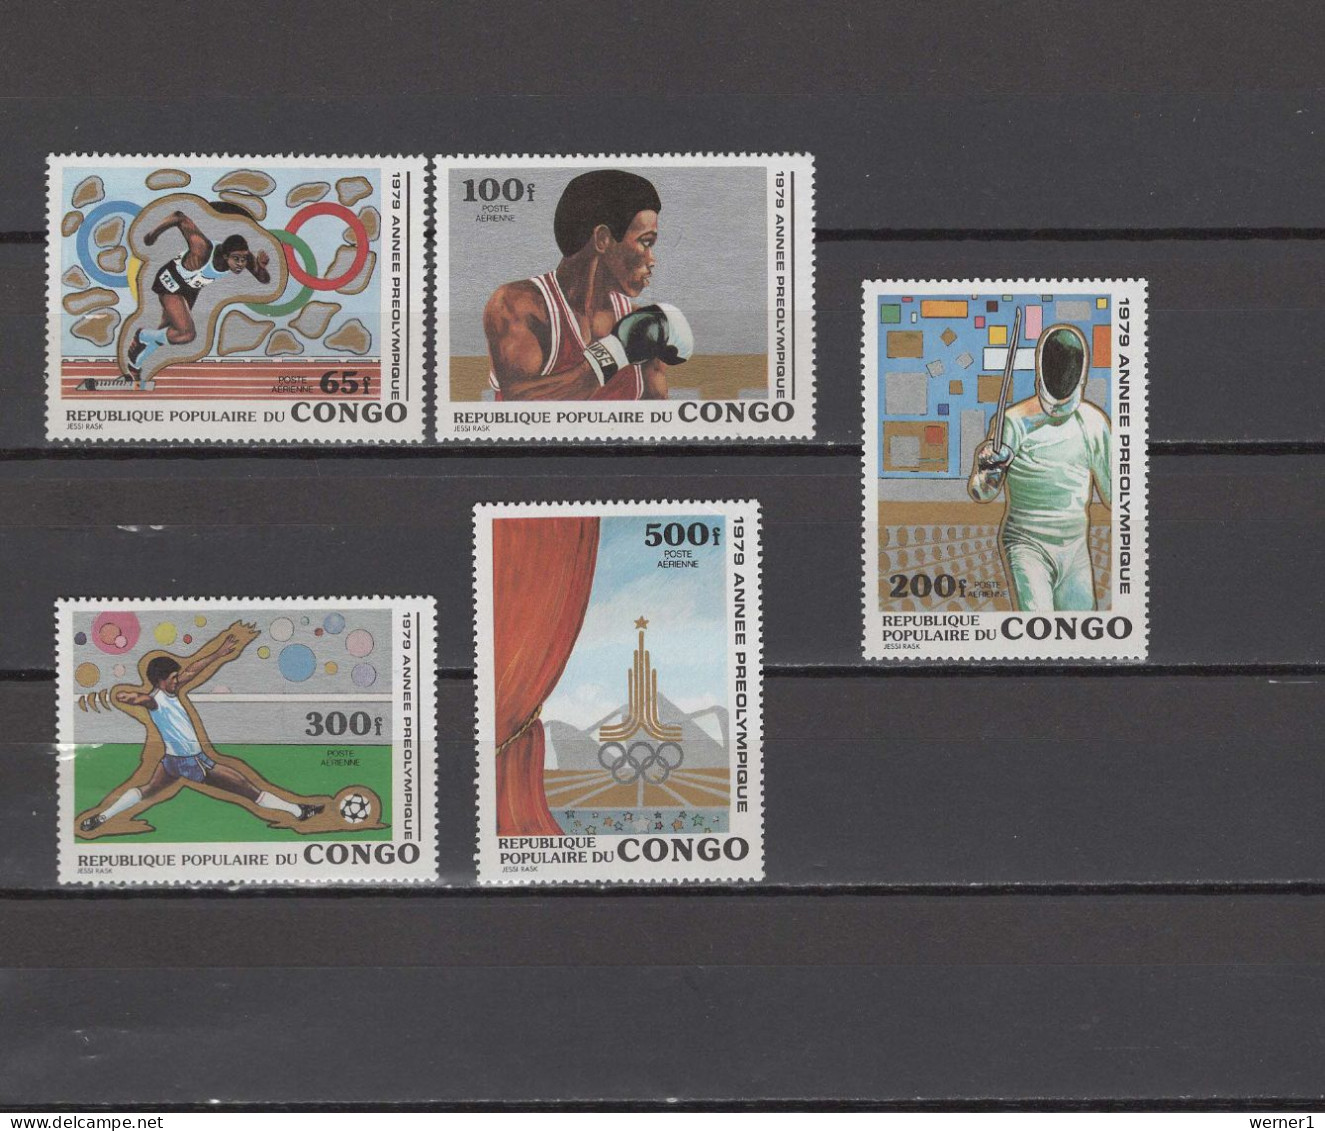 Congo 1979 Olympic Games Moscow, Boxing, Football Soccer, Fencing, Athletics Set Of 5 MNH - Ete 1980: Moscou